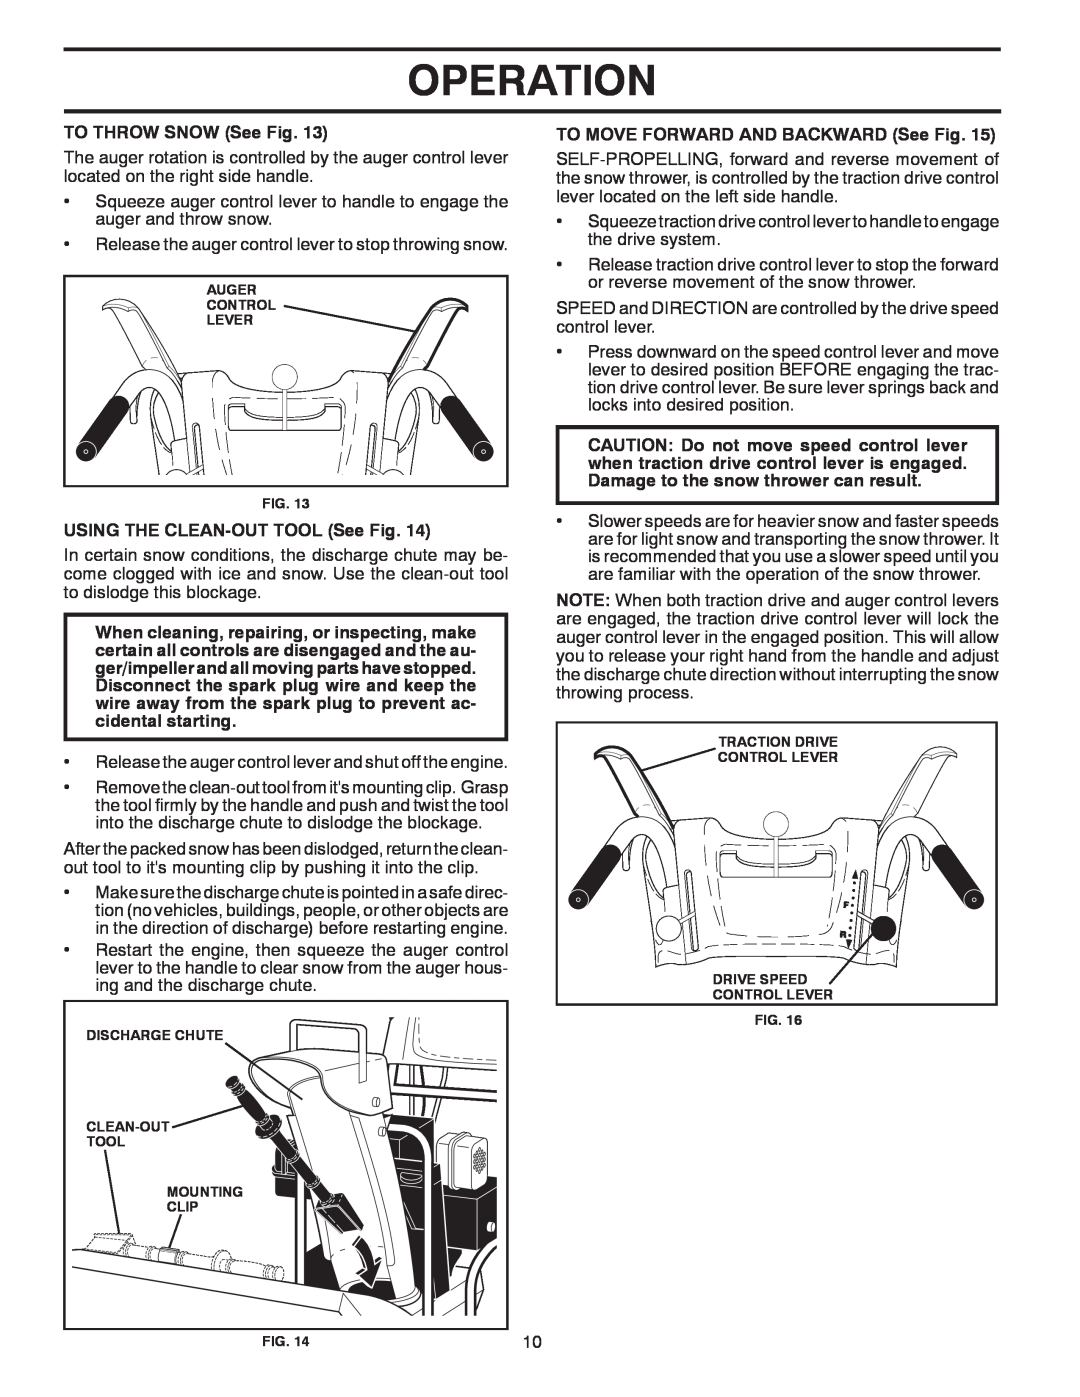 McCulloch 96192004001 owner manual Operation, TO THROW SNOW See Fig, USING THE CLEAN-OUT TOOL See Fig 